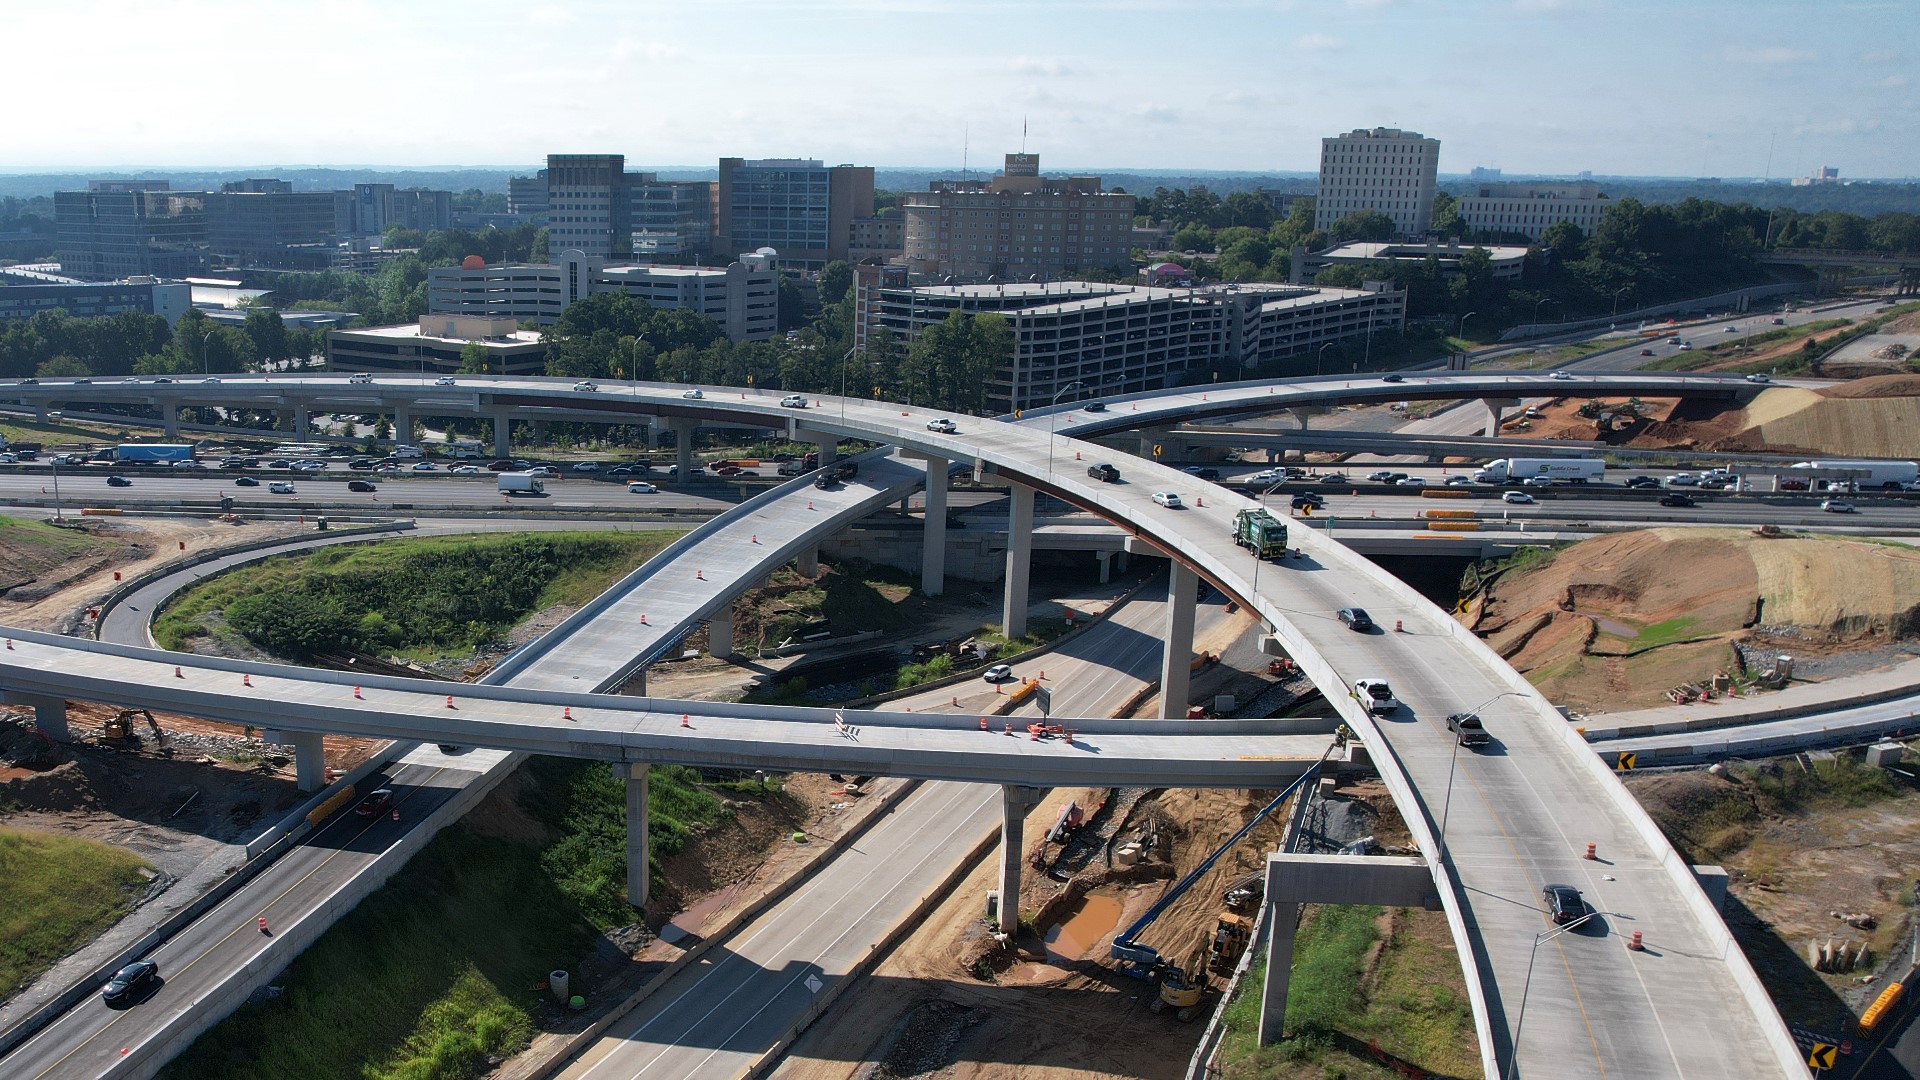 Georgia Department of Transportation has announced lane reduction on part of I-285 that'll have a major impact on traffic in metro Atlanta.